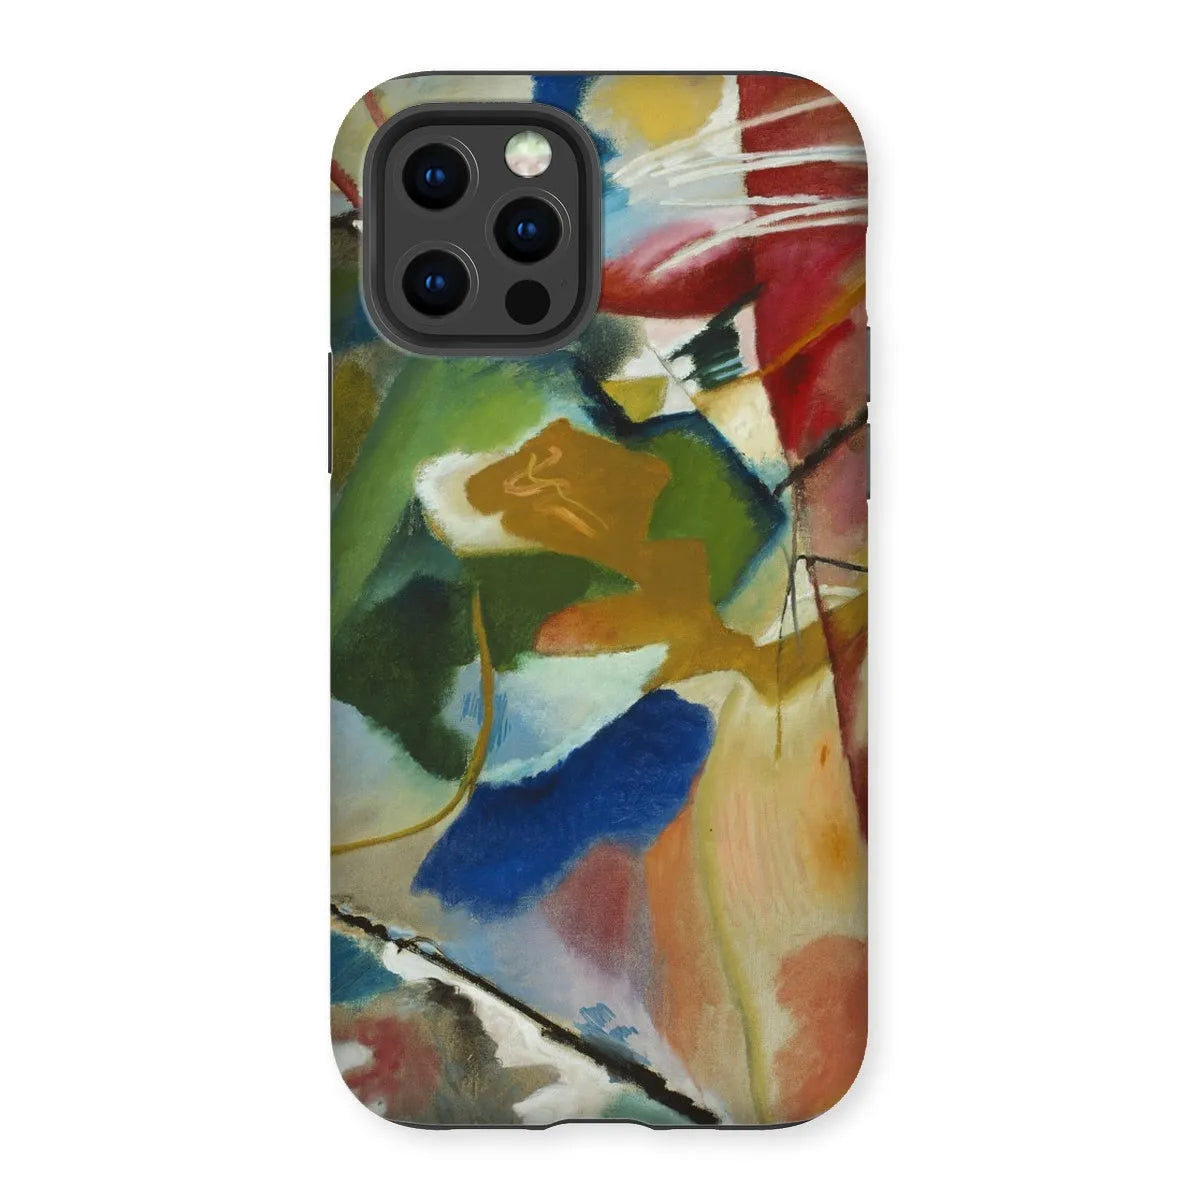 Painting With Green Center Art Phone Case - Wassily Kandinsky - Iphone 12 Pro / Matte - Mobile Phone Cases - Aesthetic